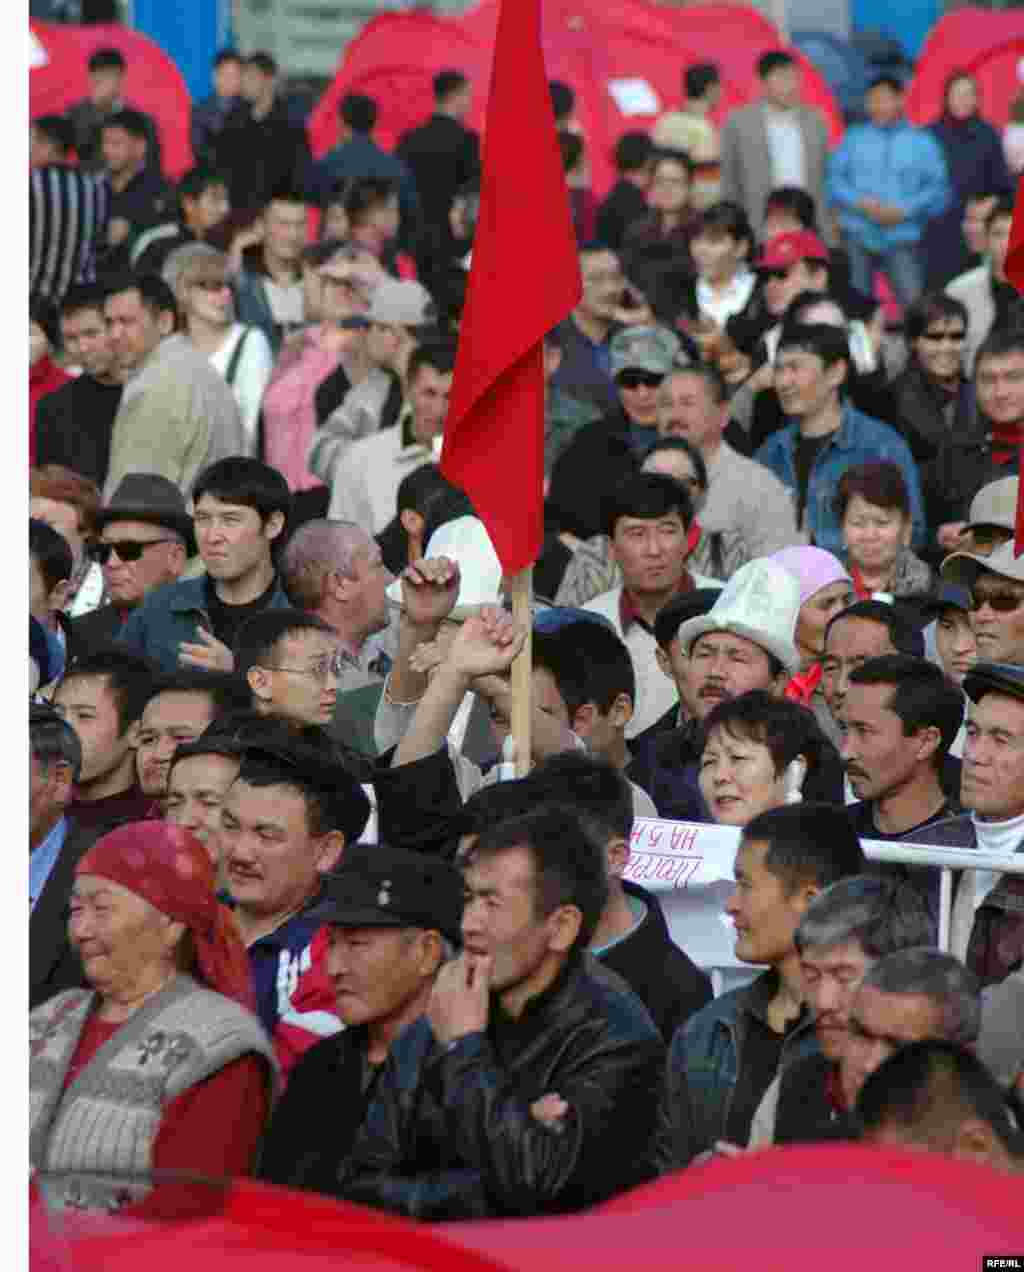 Demonstrators in Bishkek on November 6 (RFE/RL) - Economic growth in Kyrgyzstan was just 1.4 percent in 2005 and development was hampered by political instability and corruption.